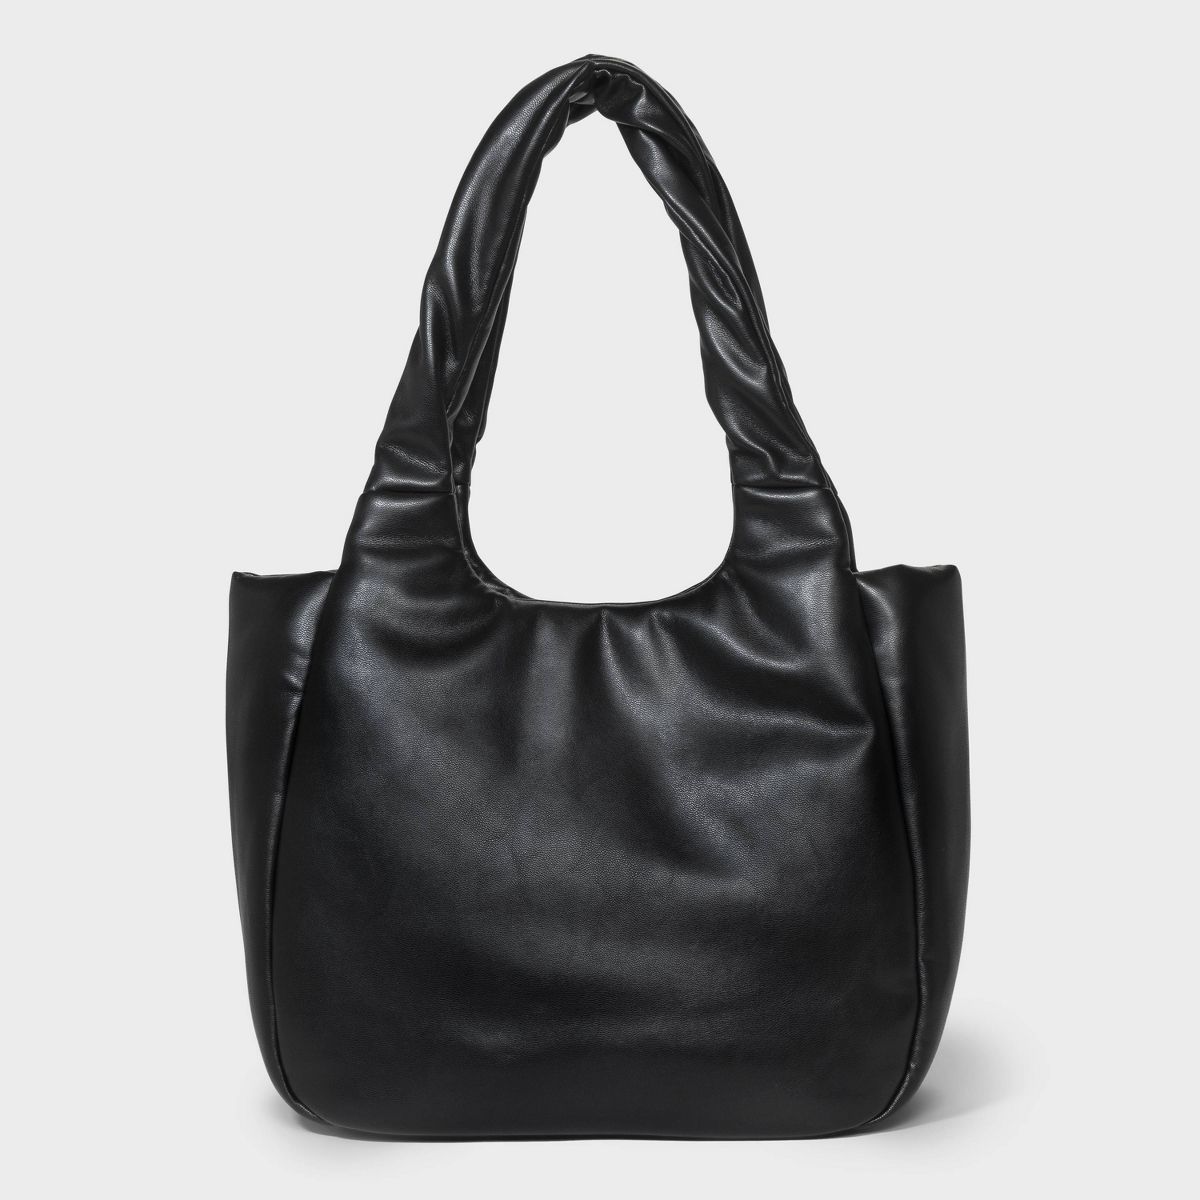 Twister Puff Tote Handbag - A New Day™ | Target